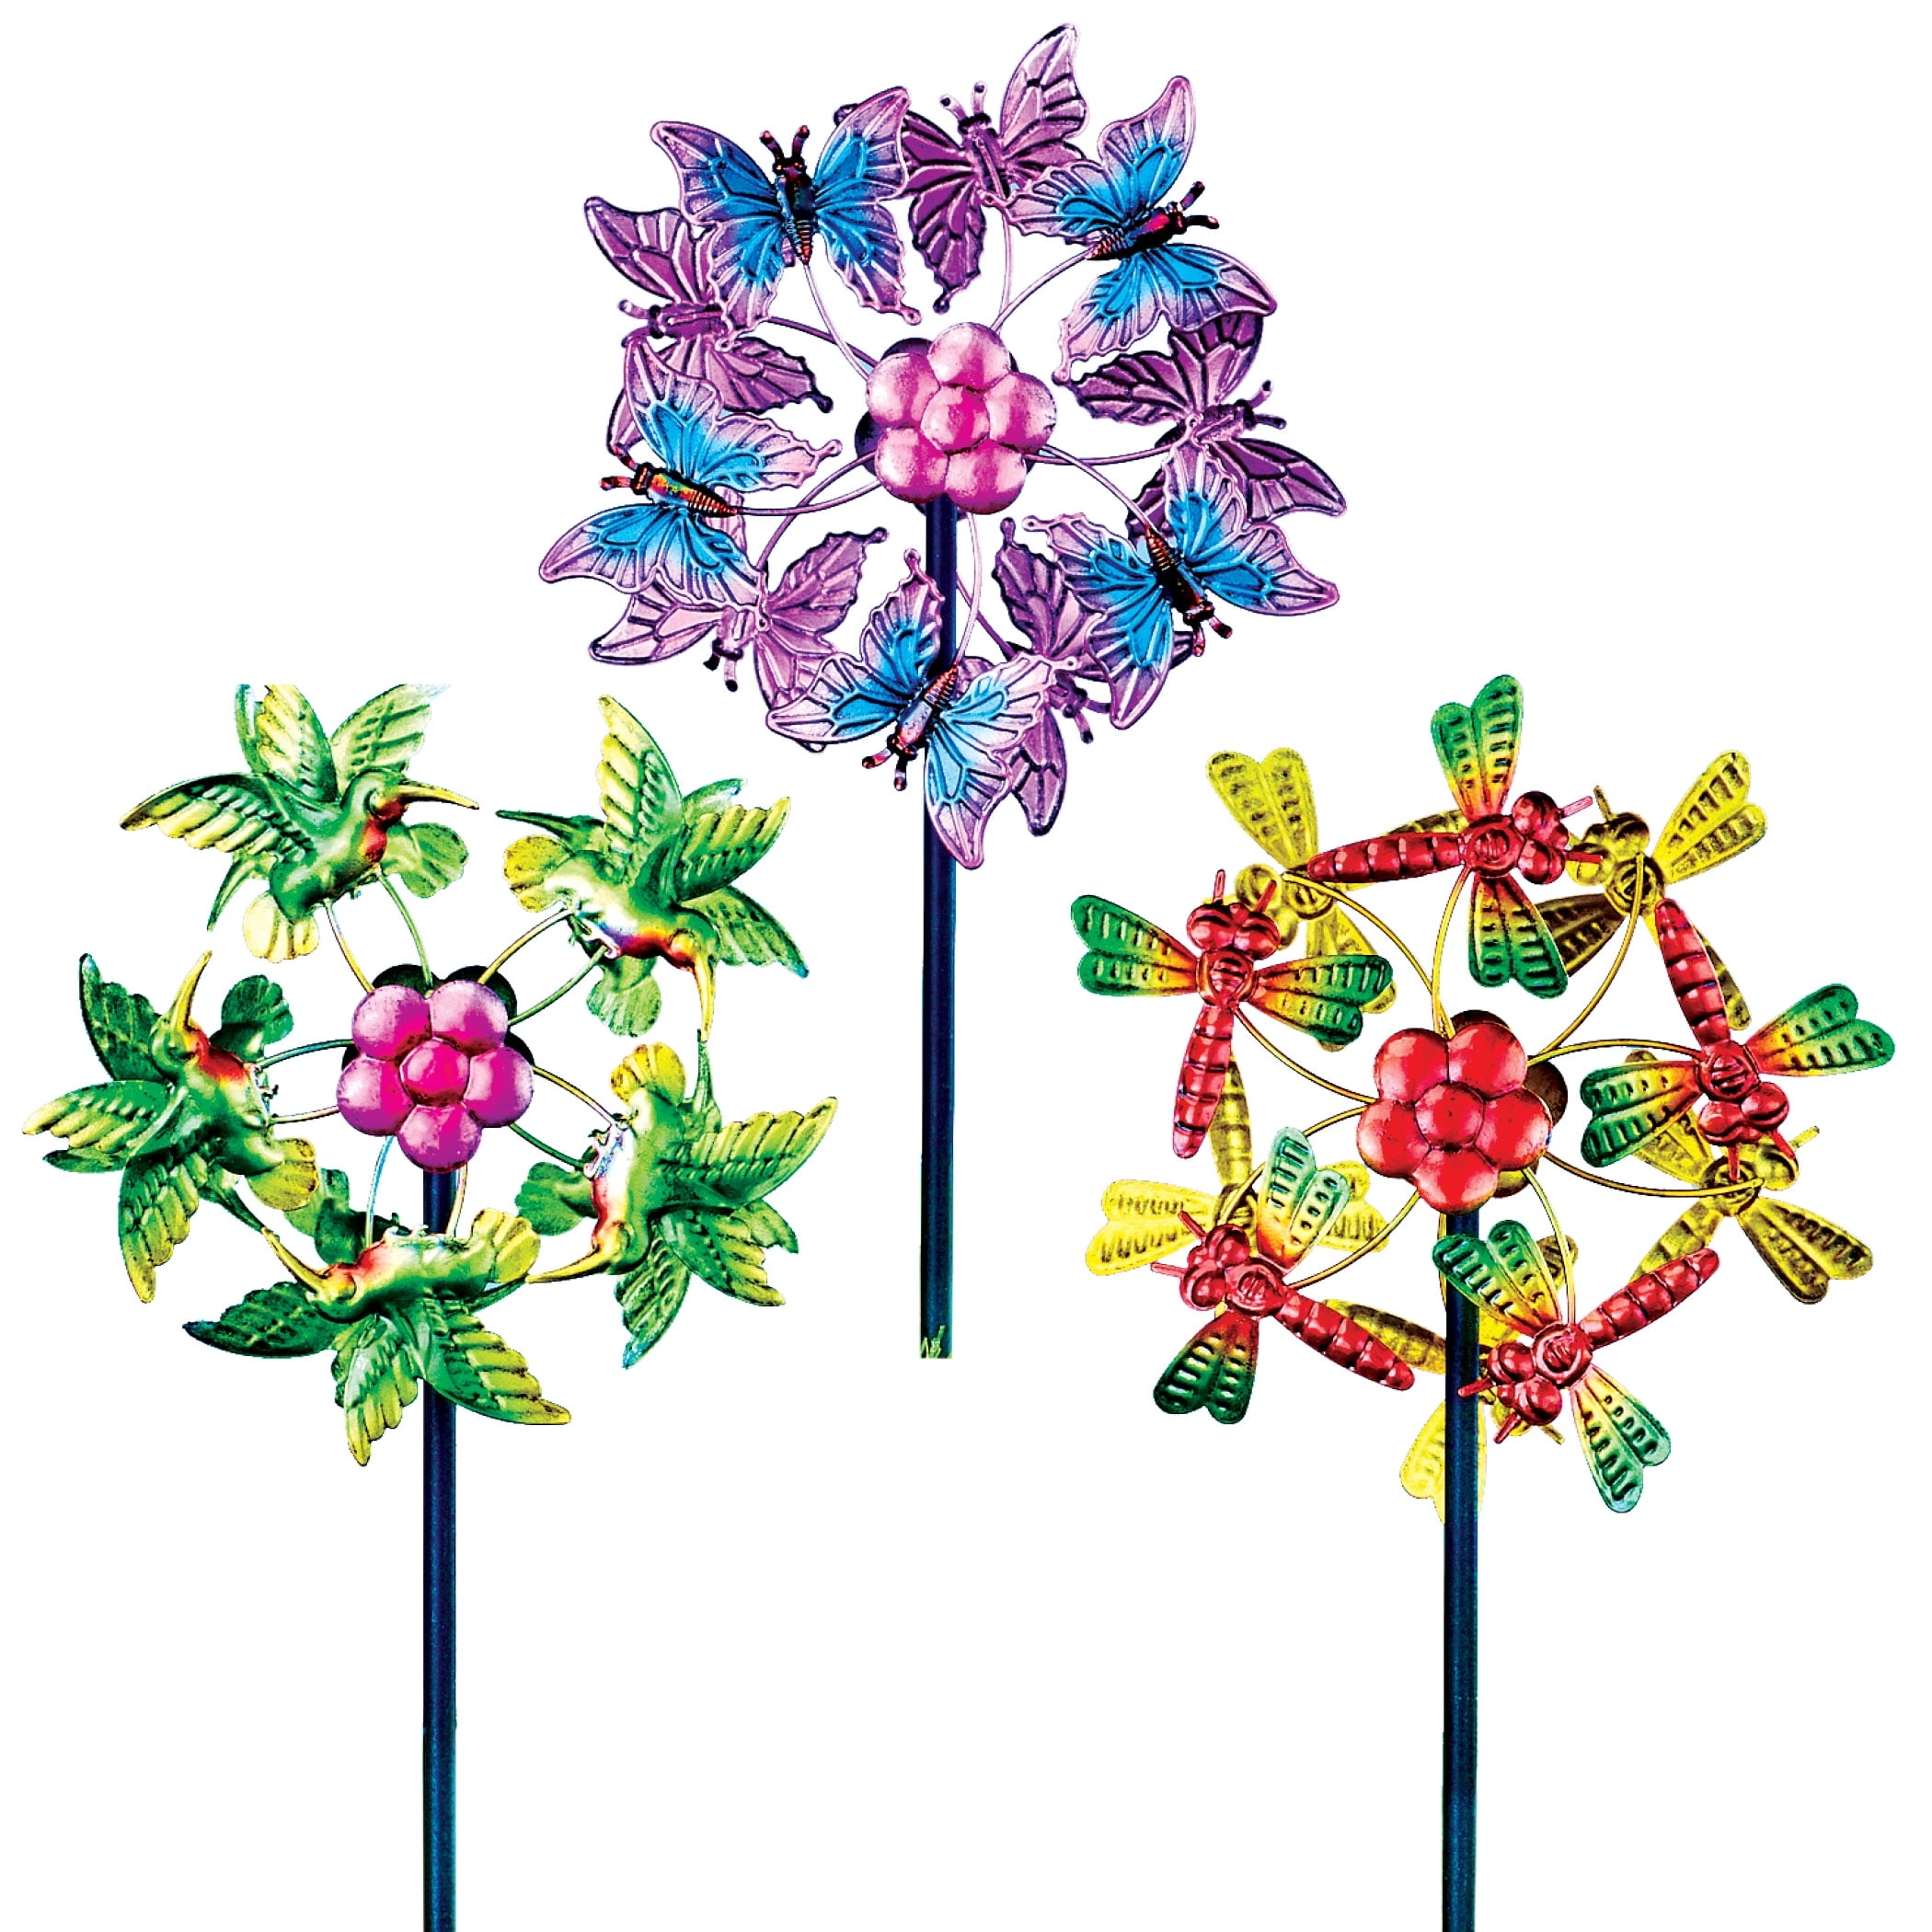 fdsad Wind Spinners Butterfly Outdoor Windmill Stake Metal Wind Powered Kinetic Sculptures Garden Wind Spinners With Stable Stake Metal For Outdoor Yard Lawn Garden Flower Decorations Ornament